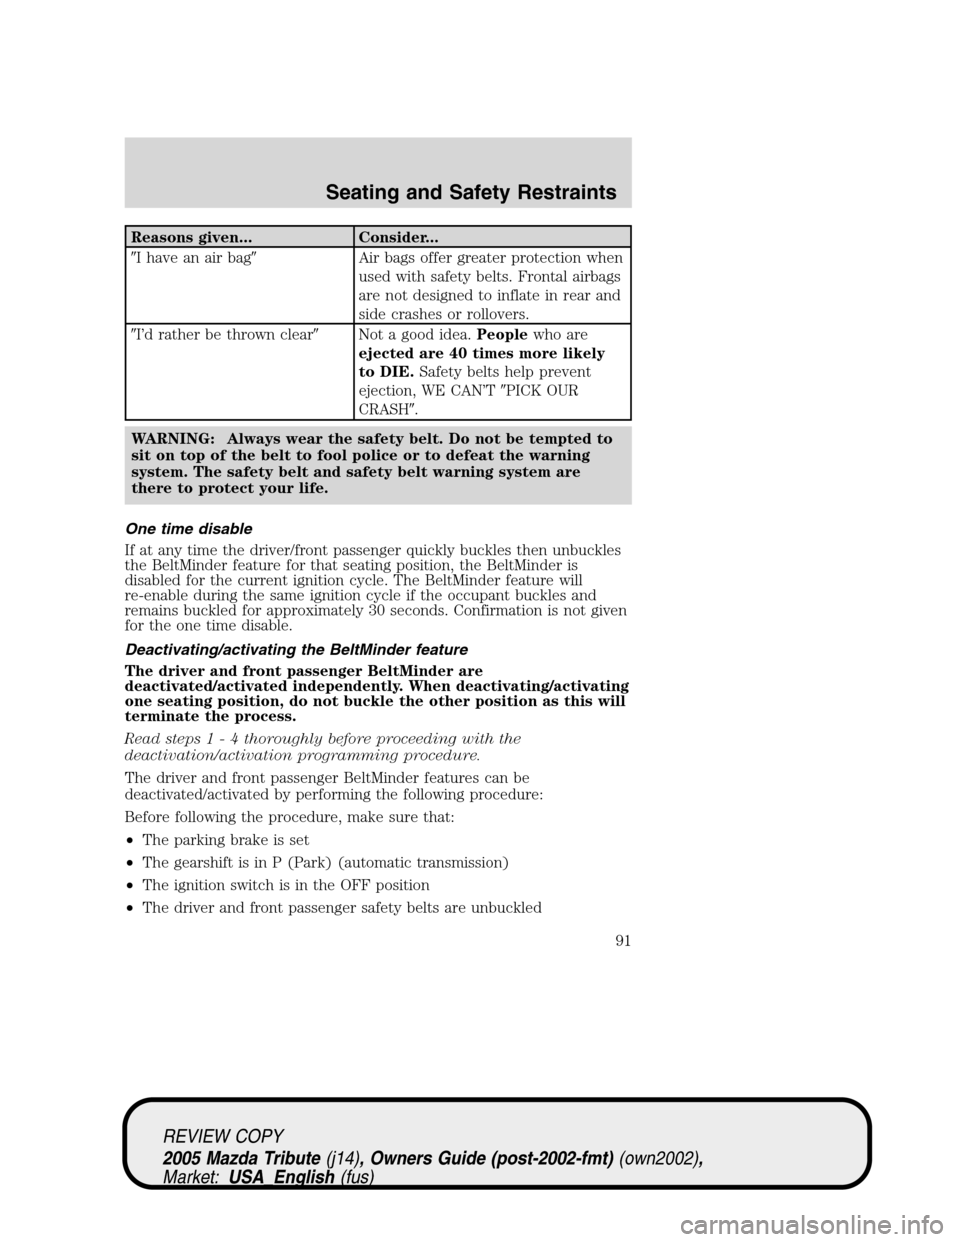 MAZDA MODEL TRIBUTE 2005  Owners Manual (in English) Reasons given... Consider...
I have an air bagAir bags offer greater protection when
used with safety belts. Frontal airbags
are not designed to inflate in rear and
side crashes or rollovers.
I’d